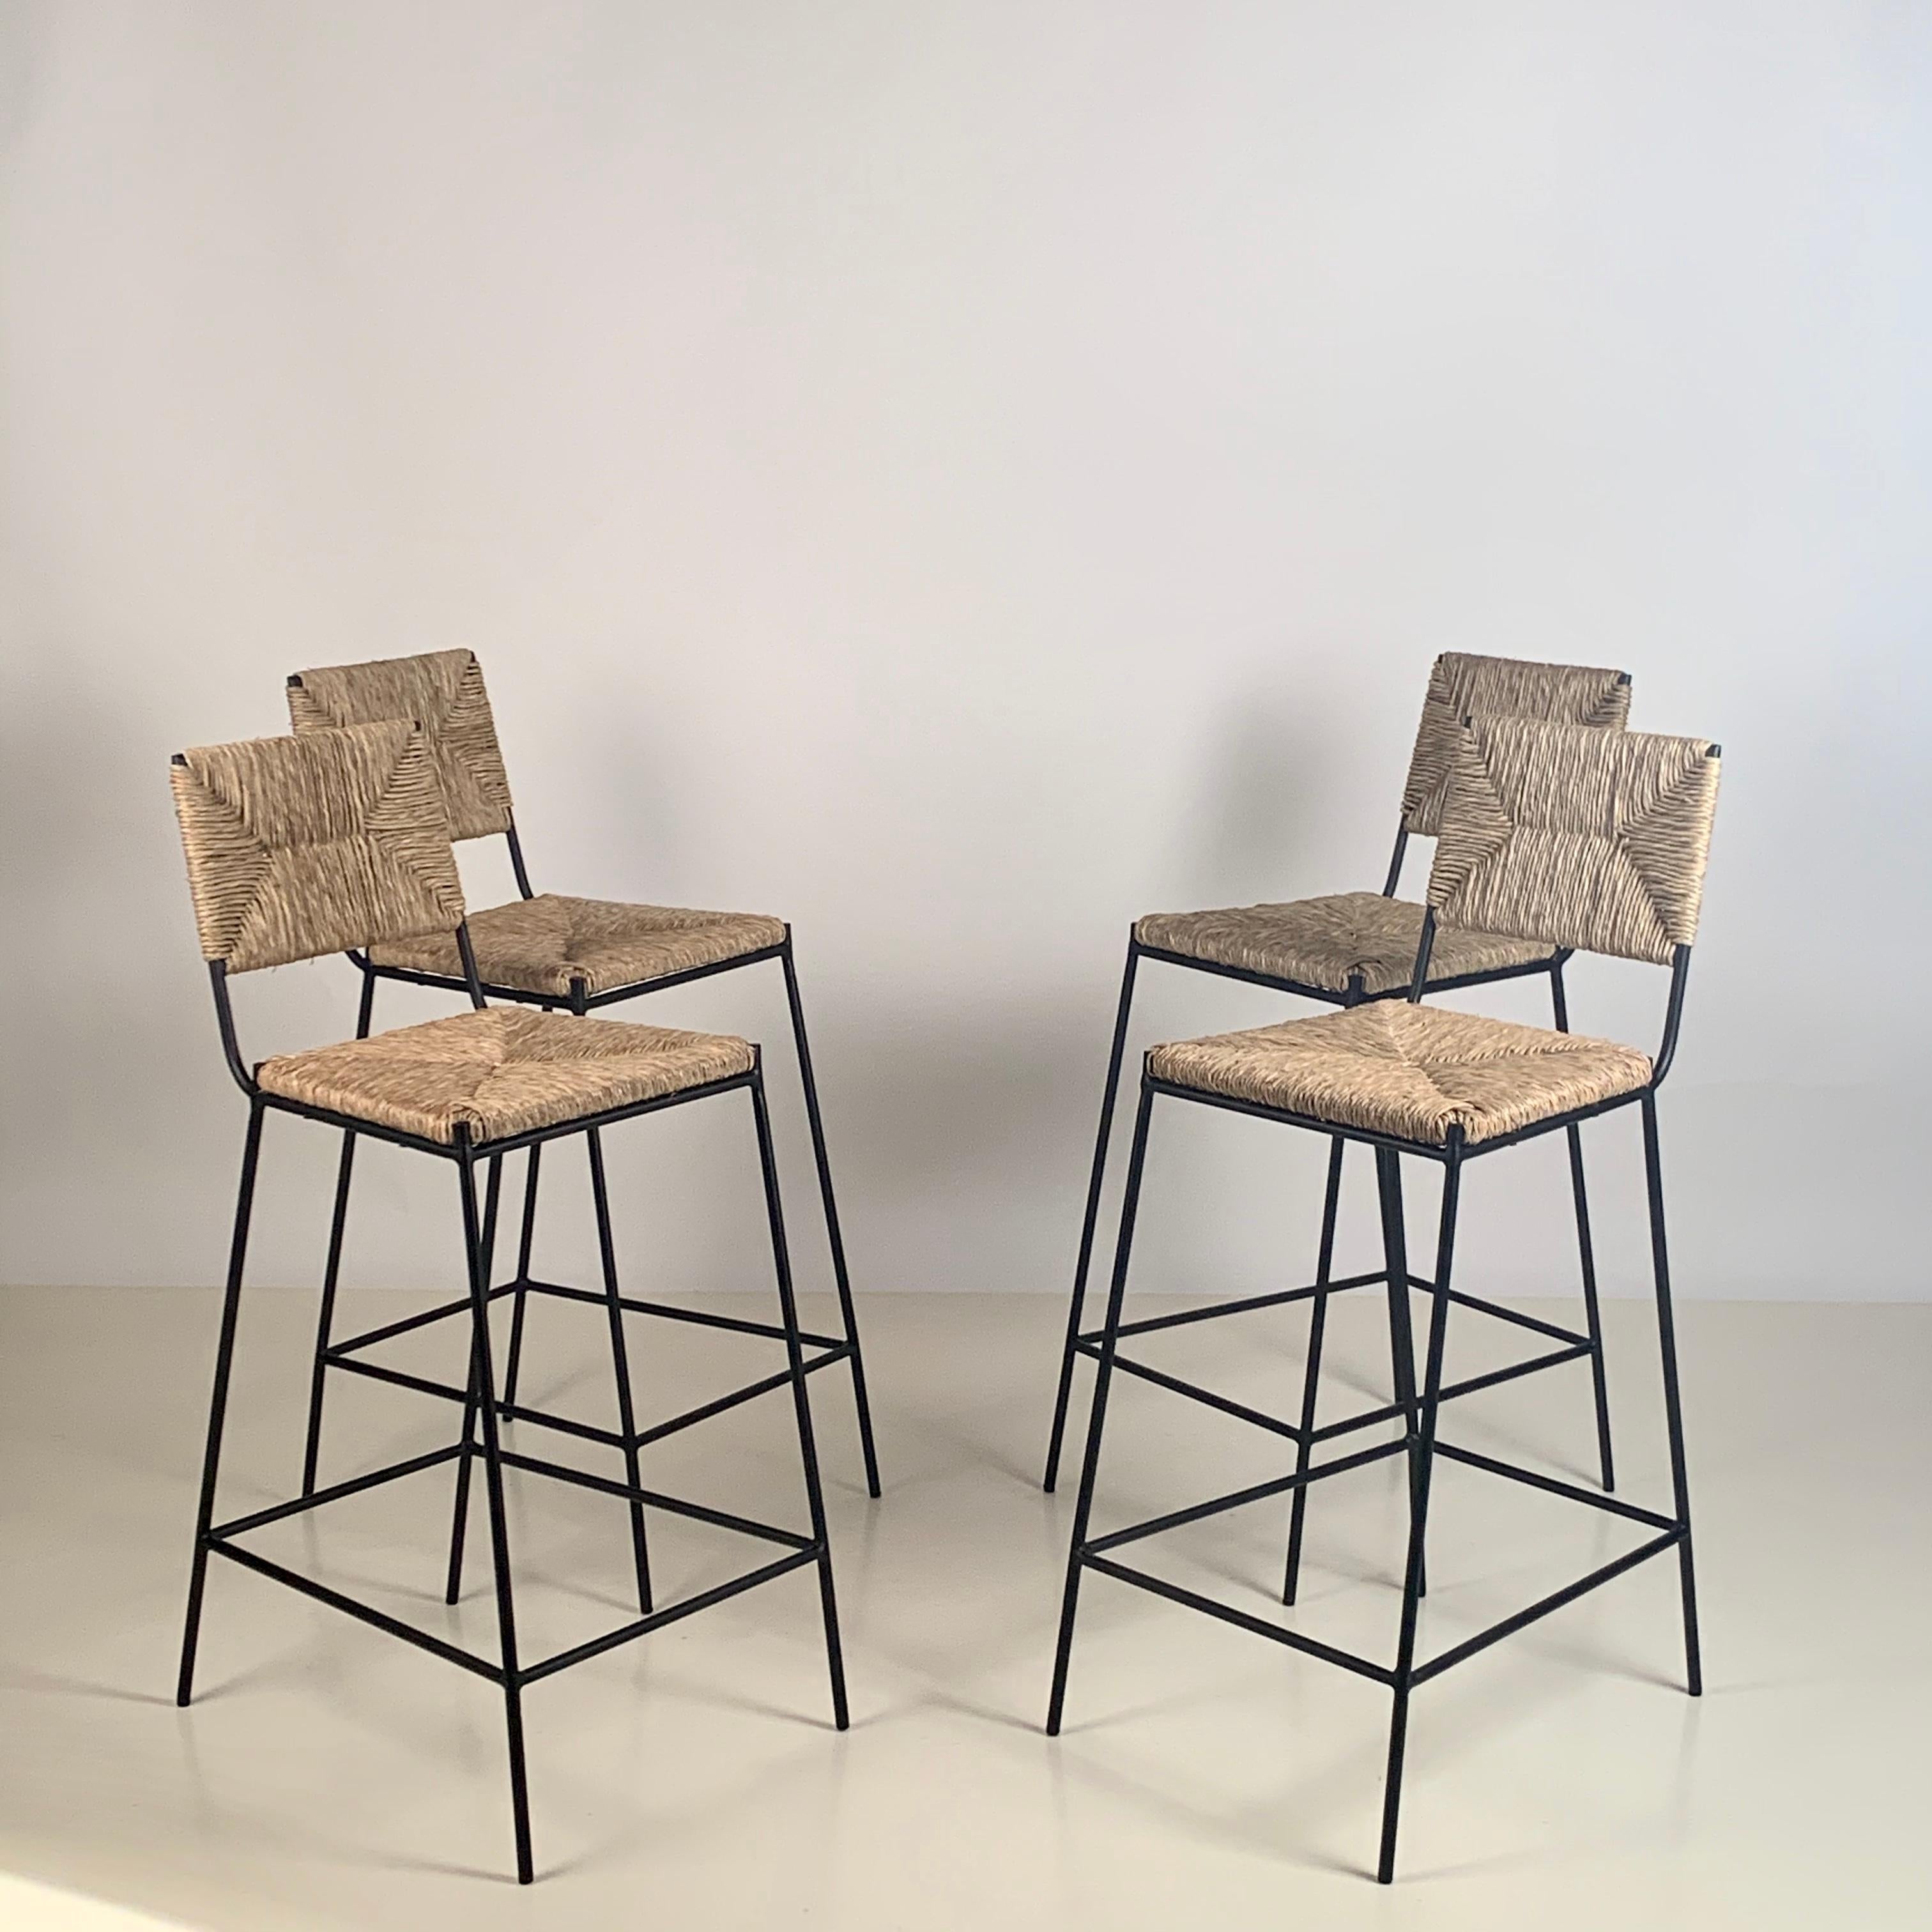 Set of 4 'Campagne' counter height stools by Design Frères.

Chic combination of slender but sturdy and stabile powder coated steel frames with handwoven rush seats and backs. Extra support under the rush seat for durability. Durable plastic caps on